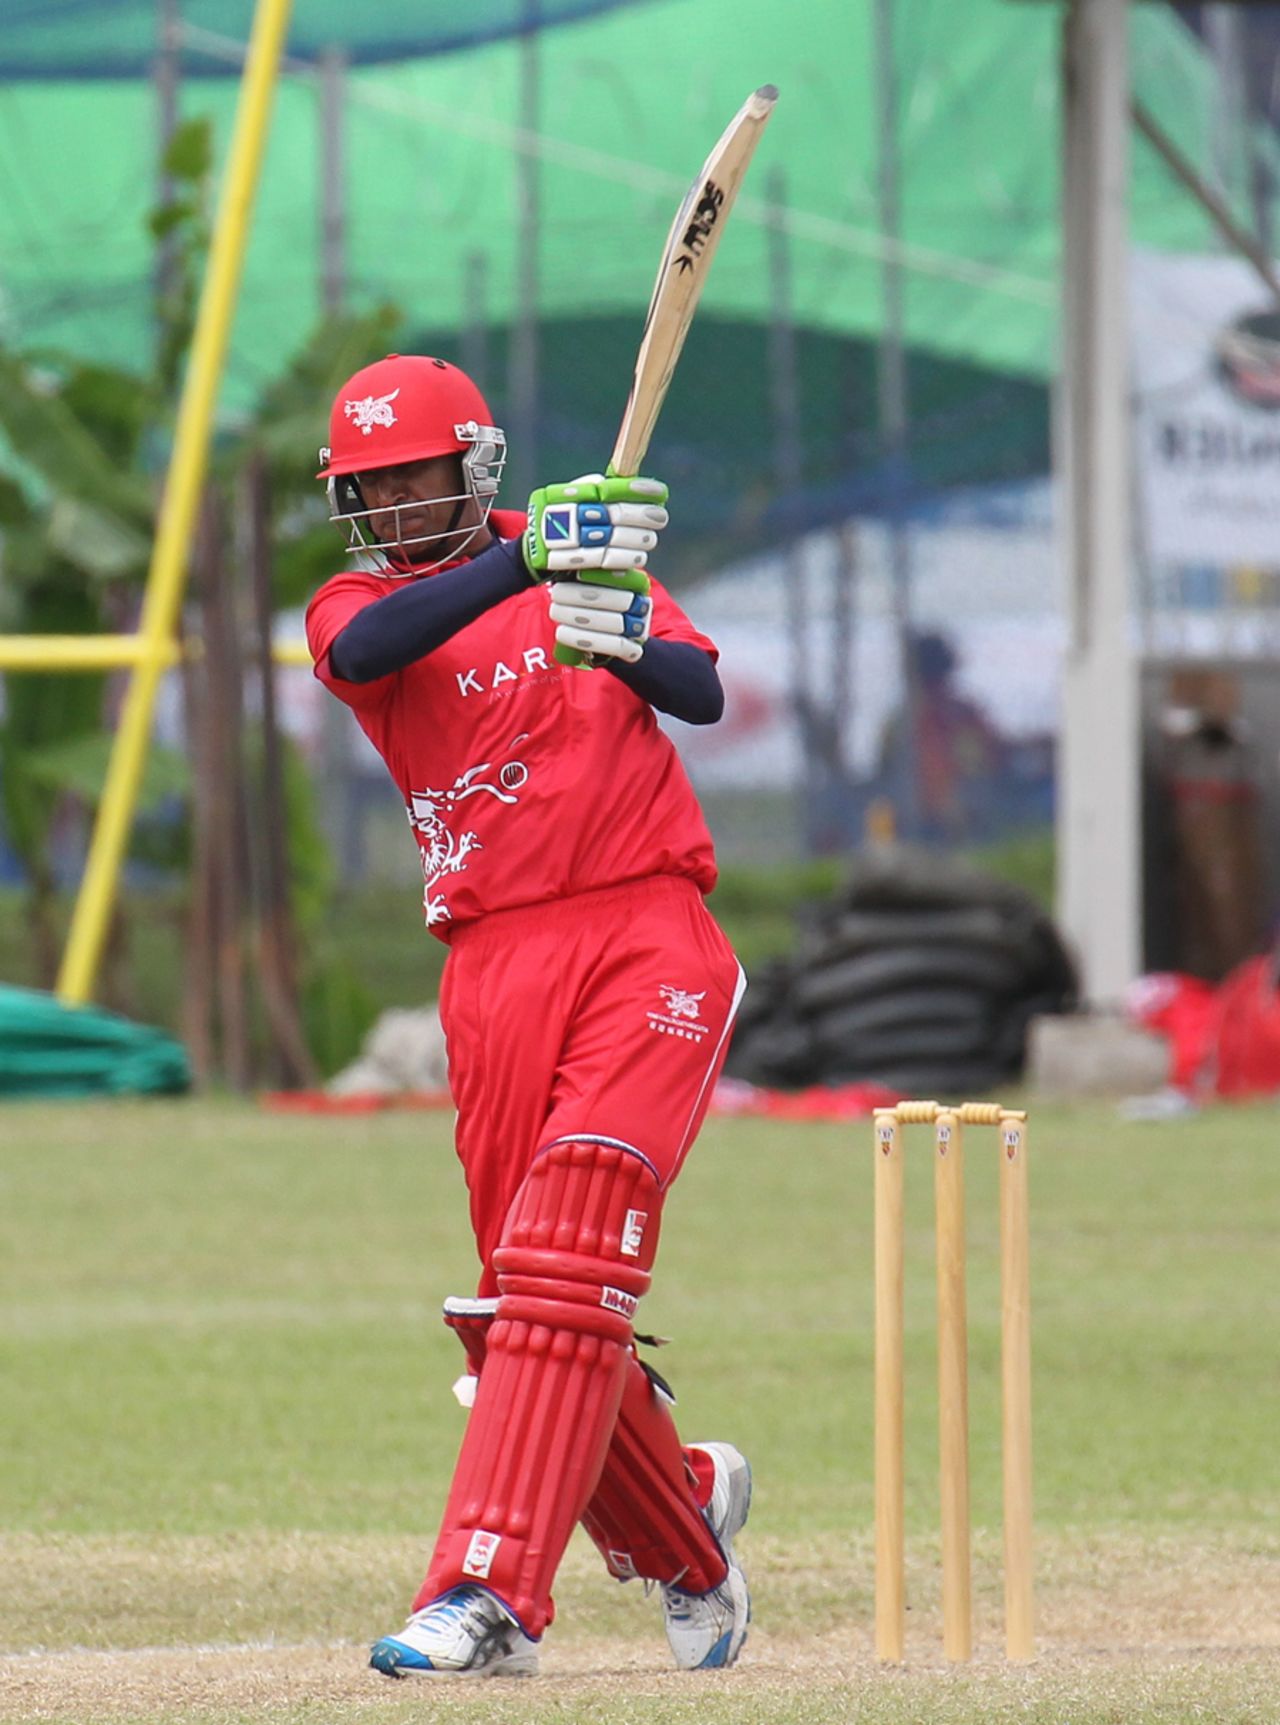 Tanwir Afzal hits another boundary on his way to 53 against PNG in the opening T20 match of the Air Niugini Super Series 2012 in Port Moresby